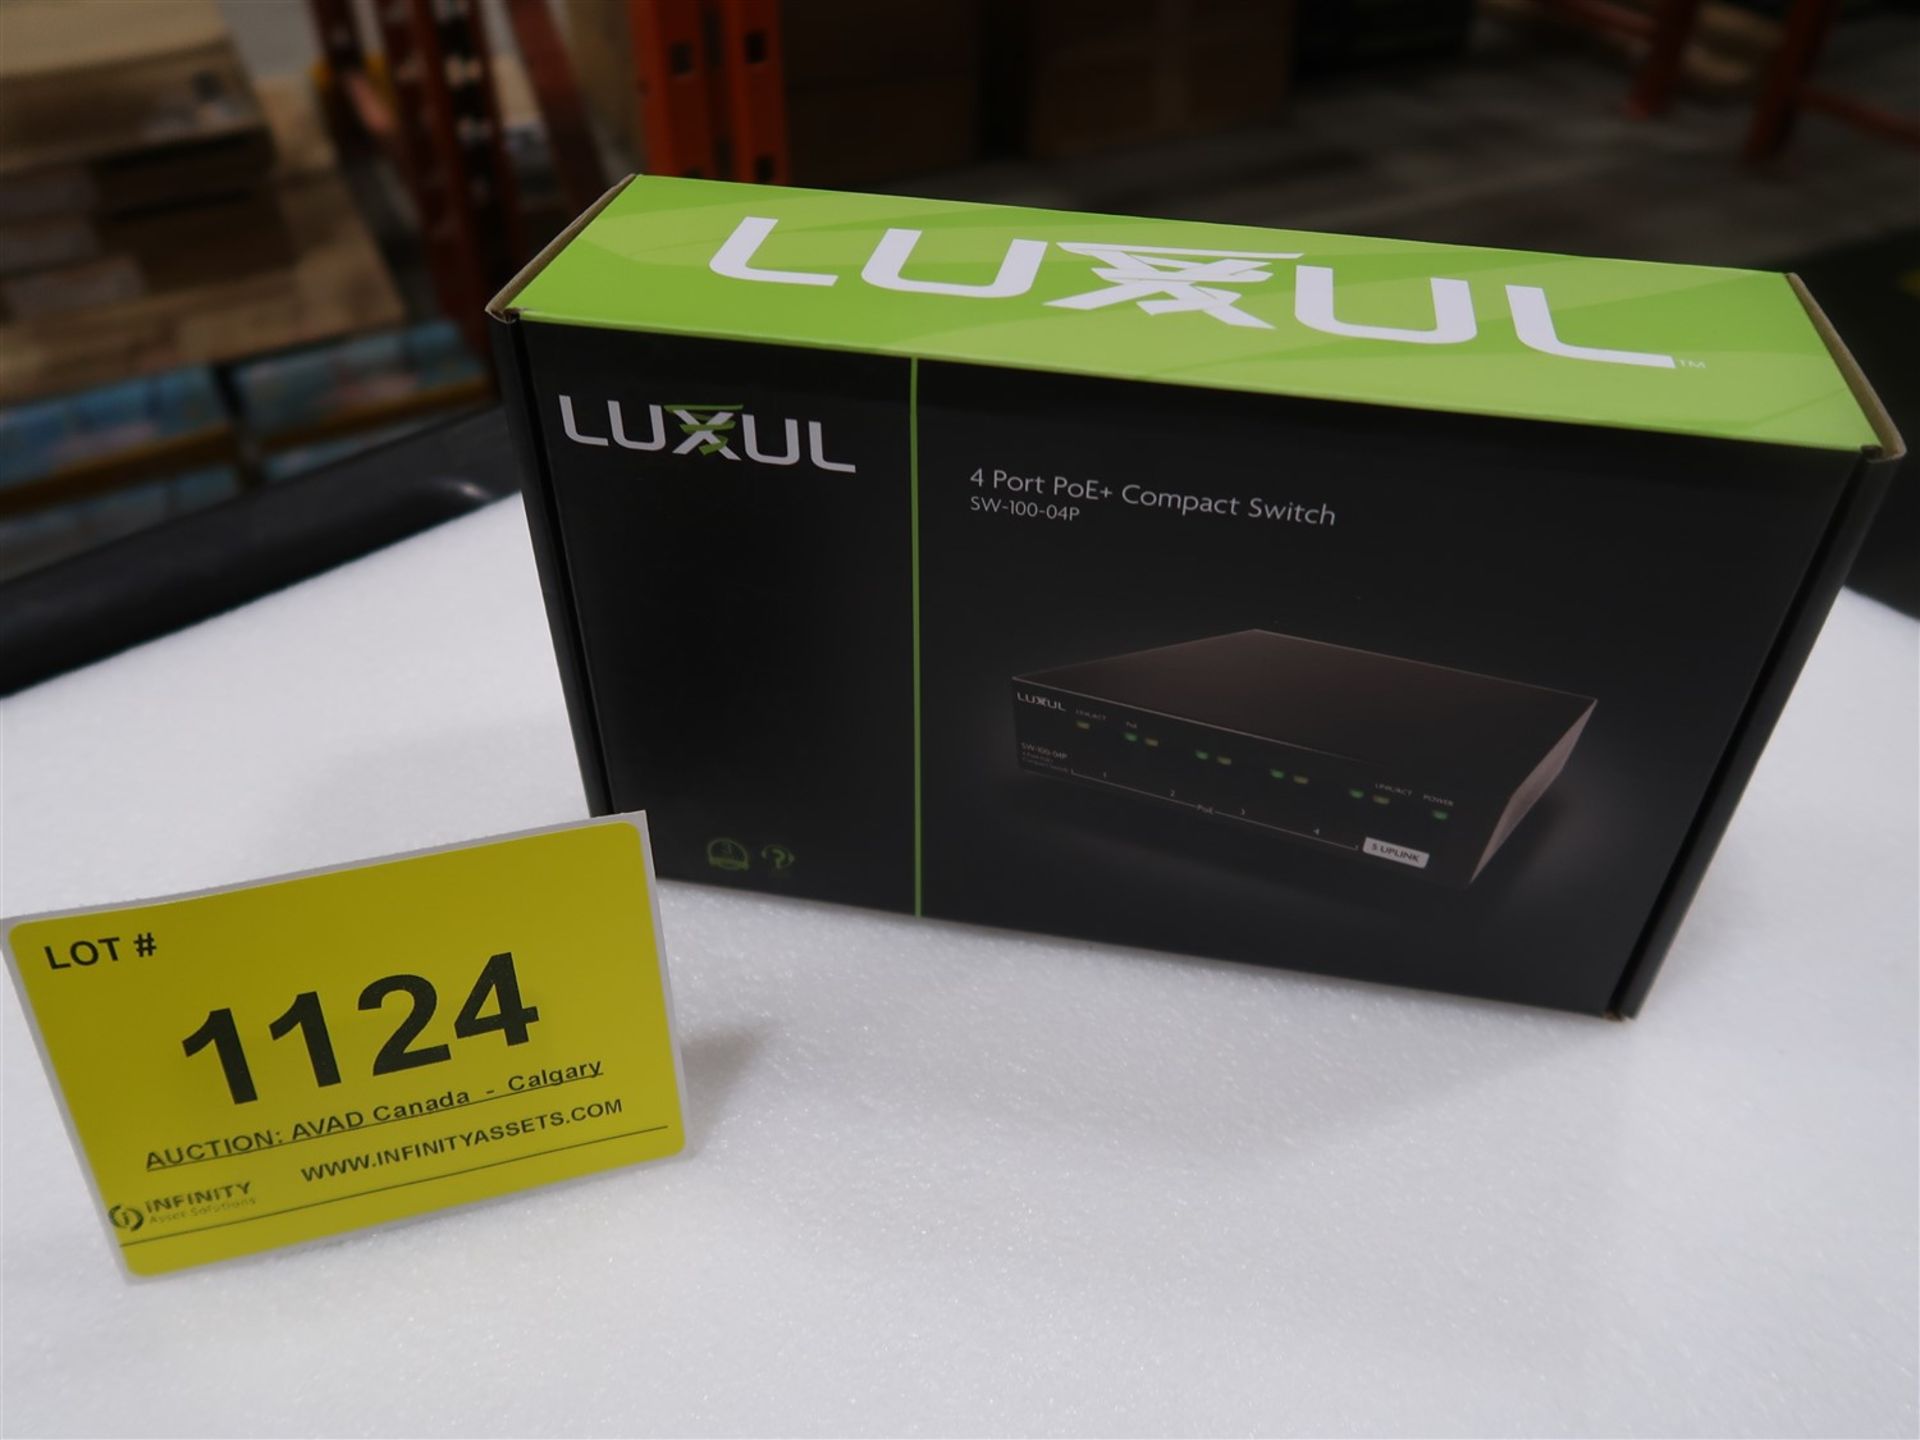 LUXUL 4 PORT POE AND COMPACT SWITCH SW-100-04P, (BNIB) MSRP $150